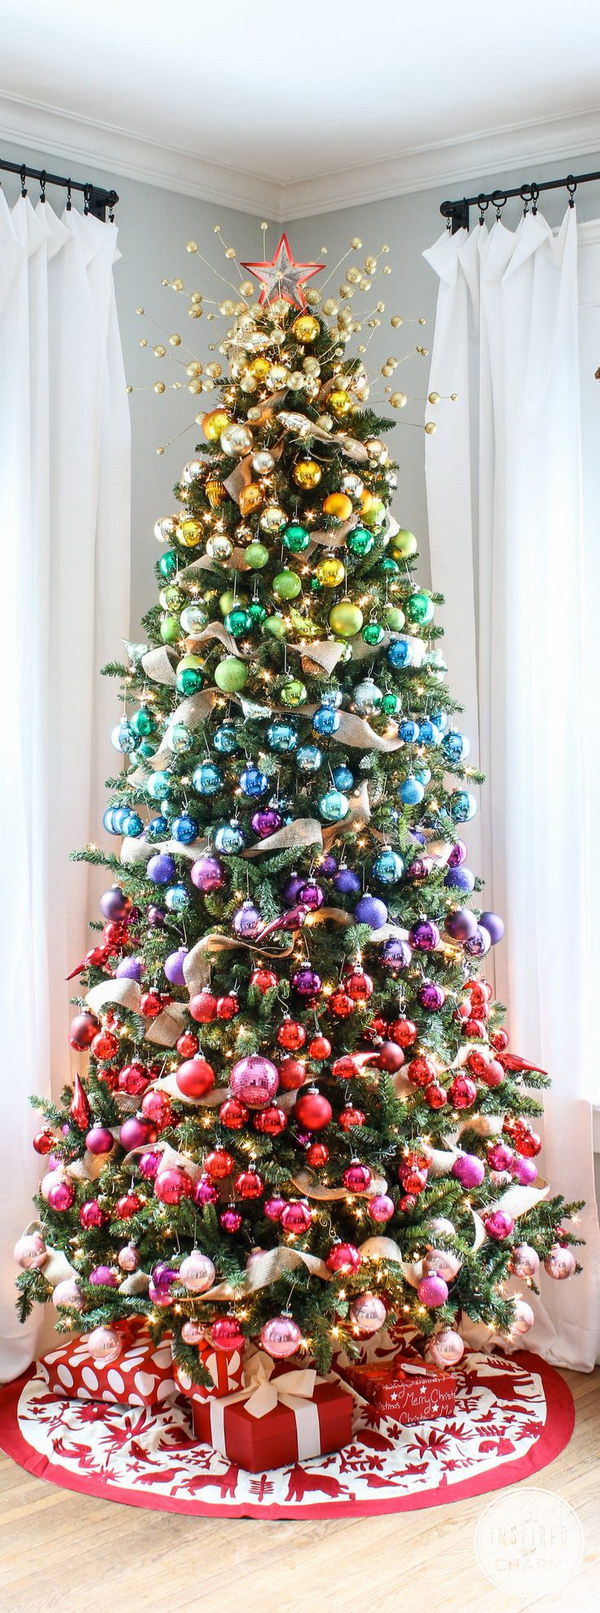 Rainbow christmas tree. This is a good idea if you don't want a traditional Christmas tree. 